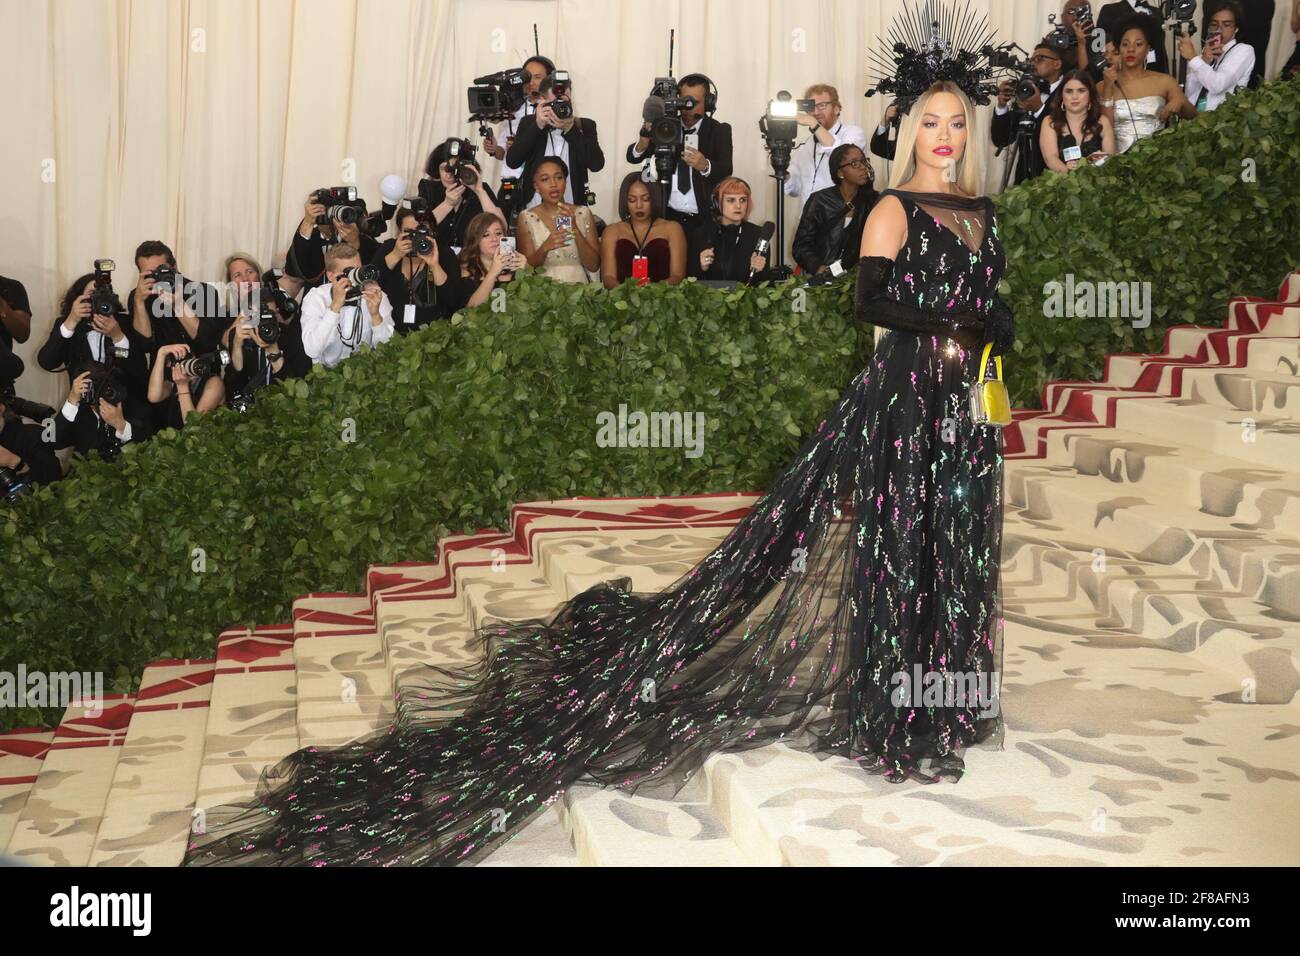 Rita Ora arrives to the 2018 Met Costume Gala Heavenly Bodies, held at the Metropolitan Museum of Art in New York City, Monday, May 7, 2018. Photo by Jennifer Graylock-Graylock.com 917-519-7666 Stock Photo